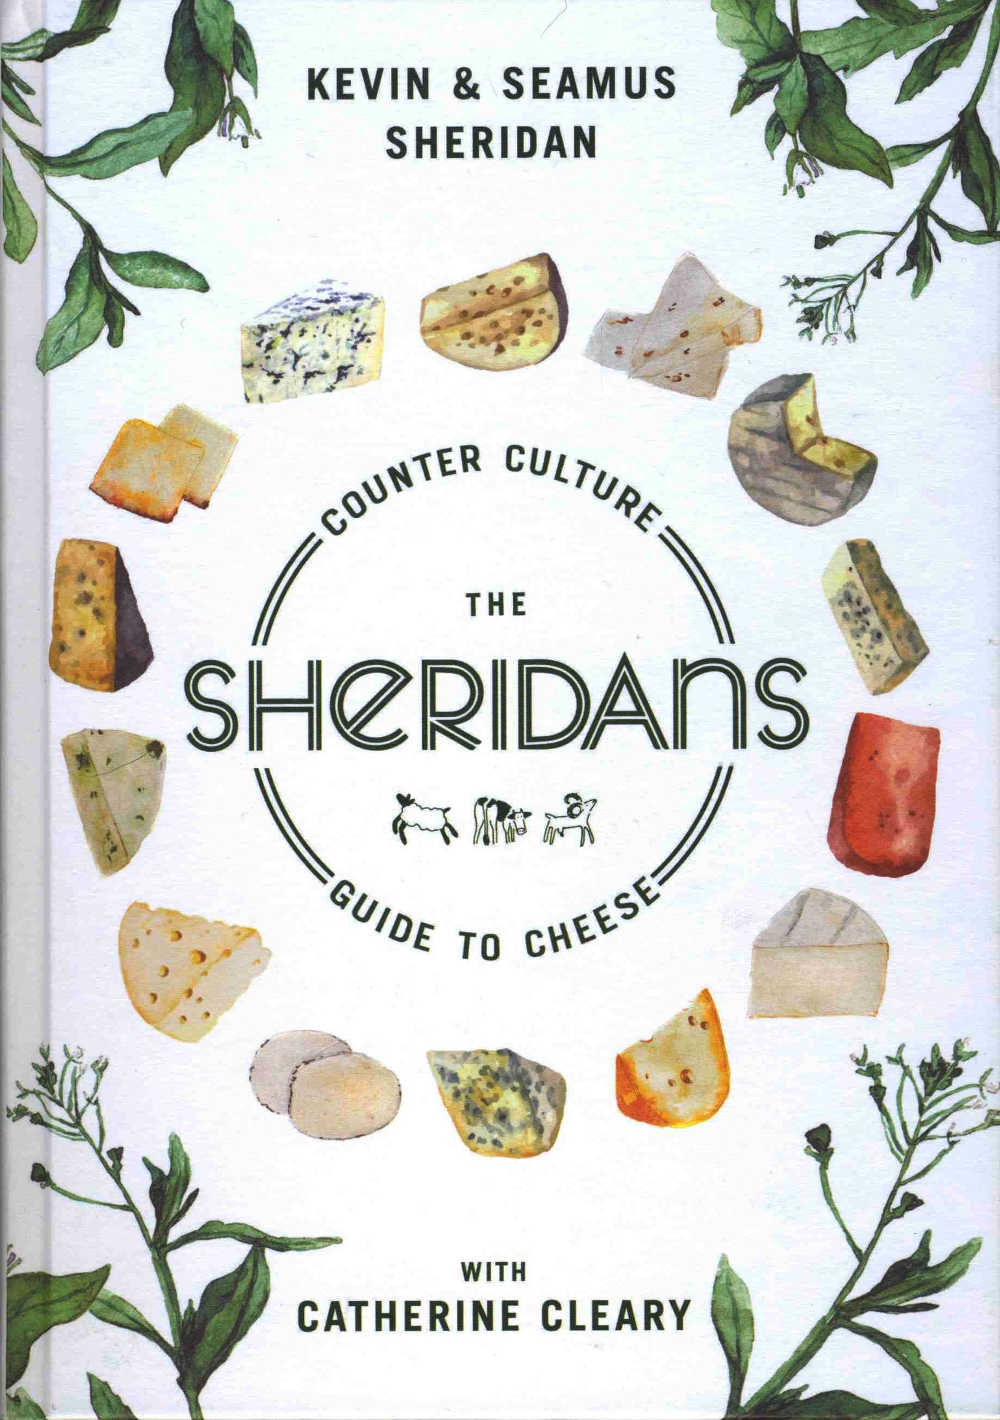 Counter Culture - The Sheridans Guide to Cheese, by Kevin and Seamus Sheridan, with Catherine Cleary (Transworld; hardback, Â£16.99)